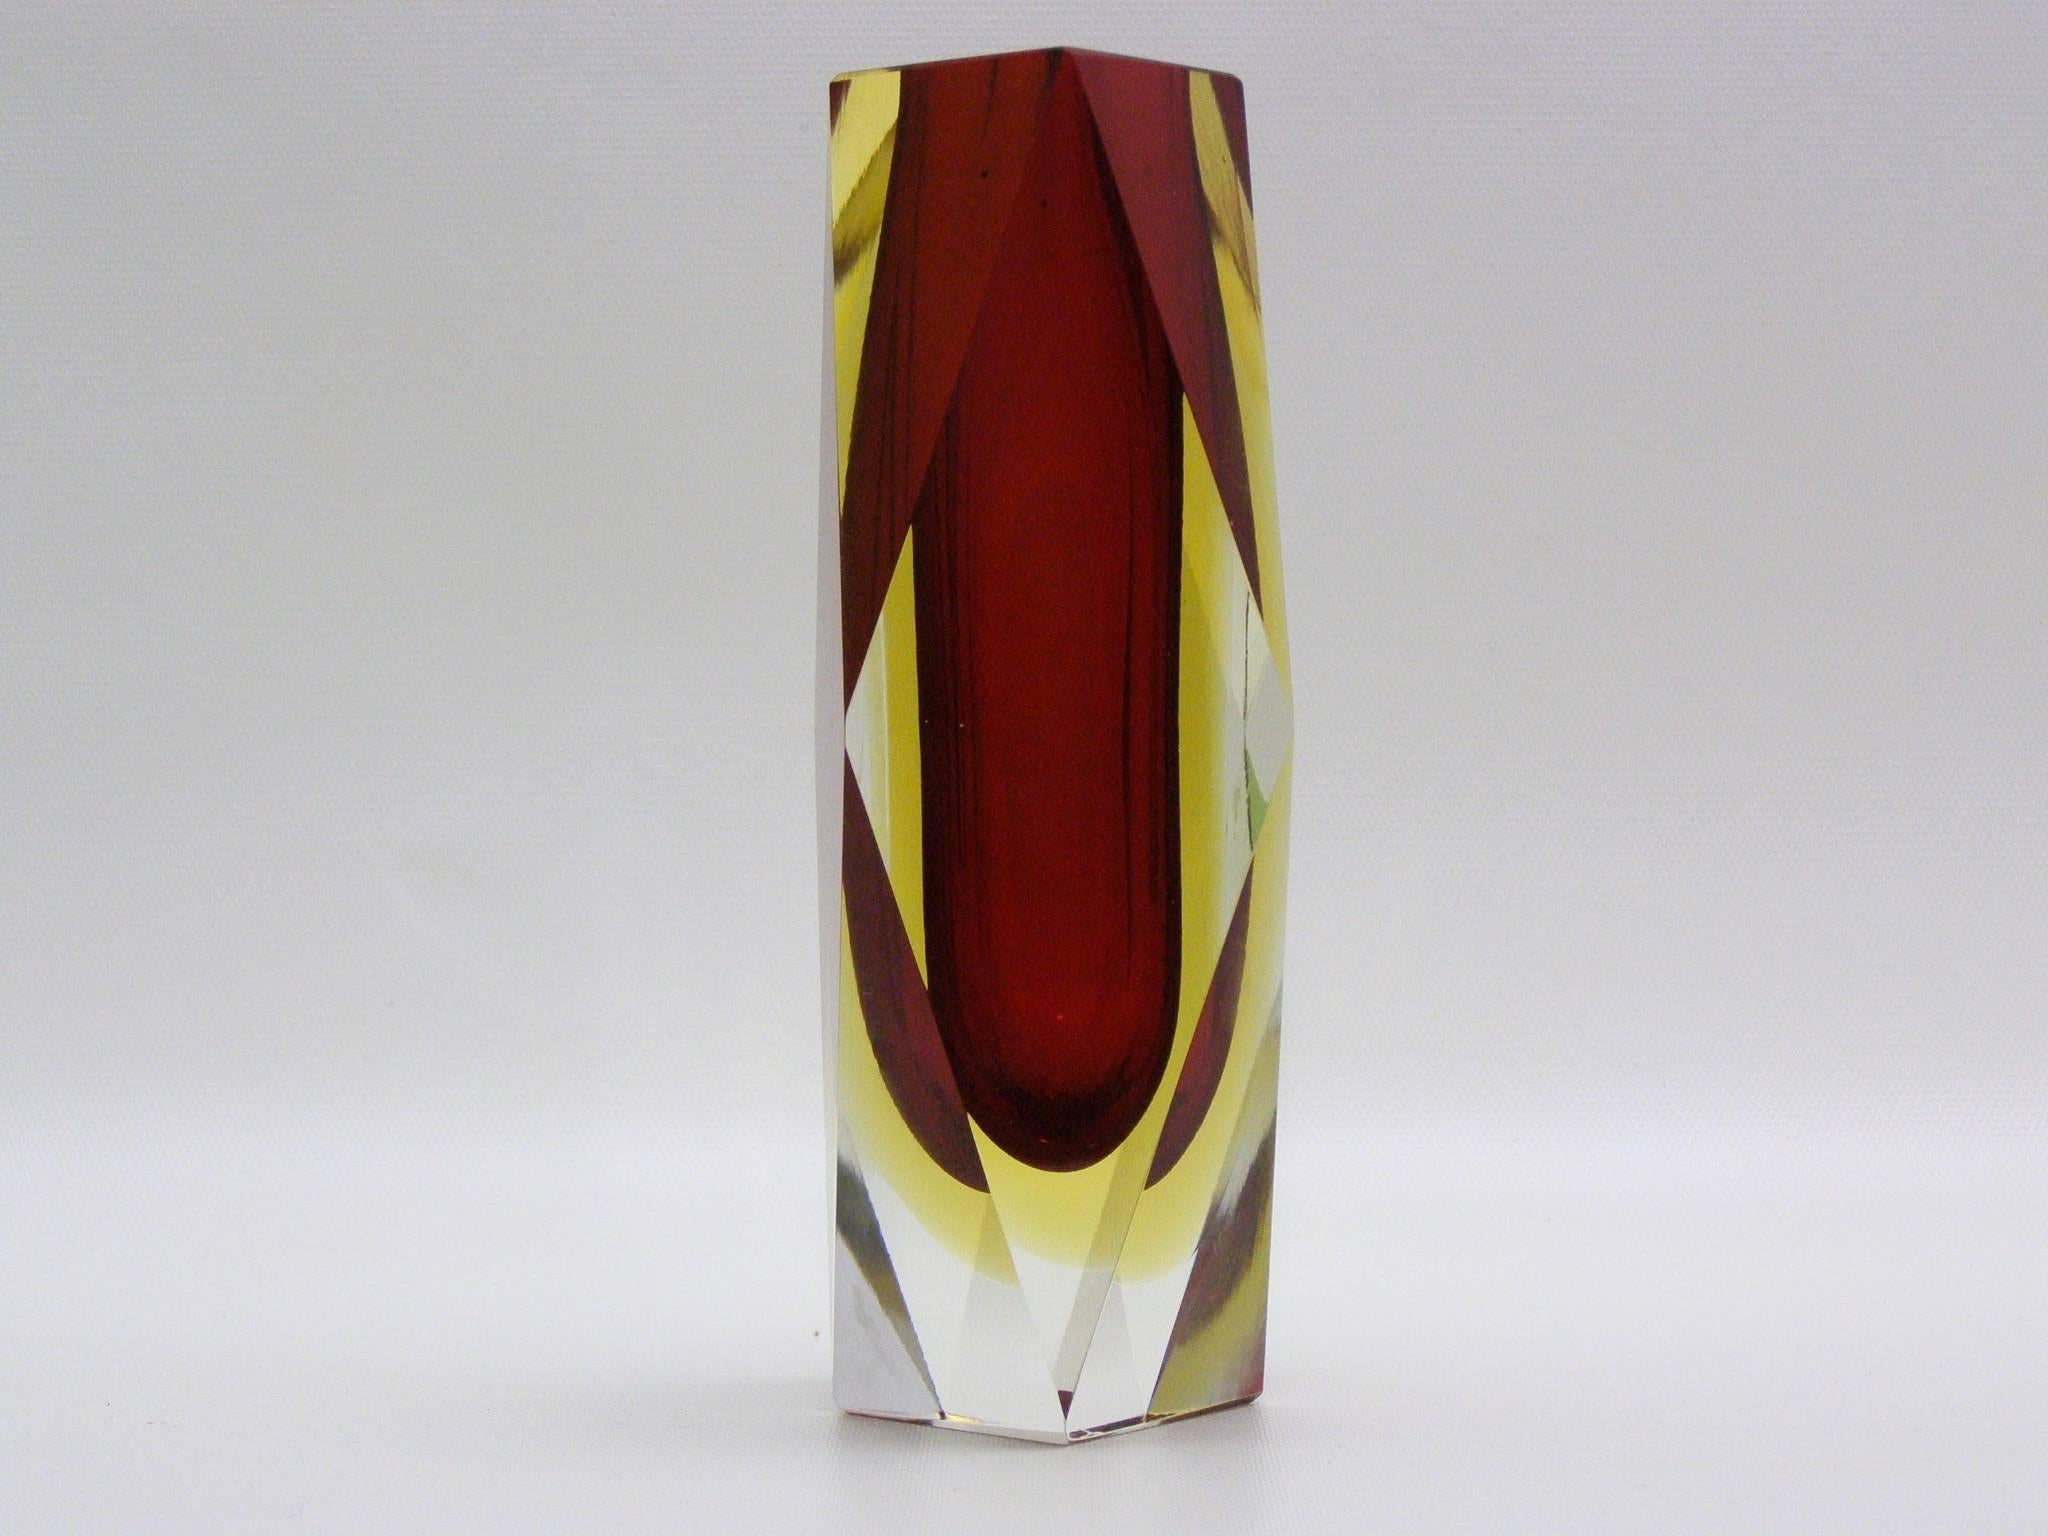 Beautiful Alessandro Mandruzzato faceted Murano glass vase in red surrounded by golden-yellow.